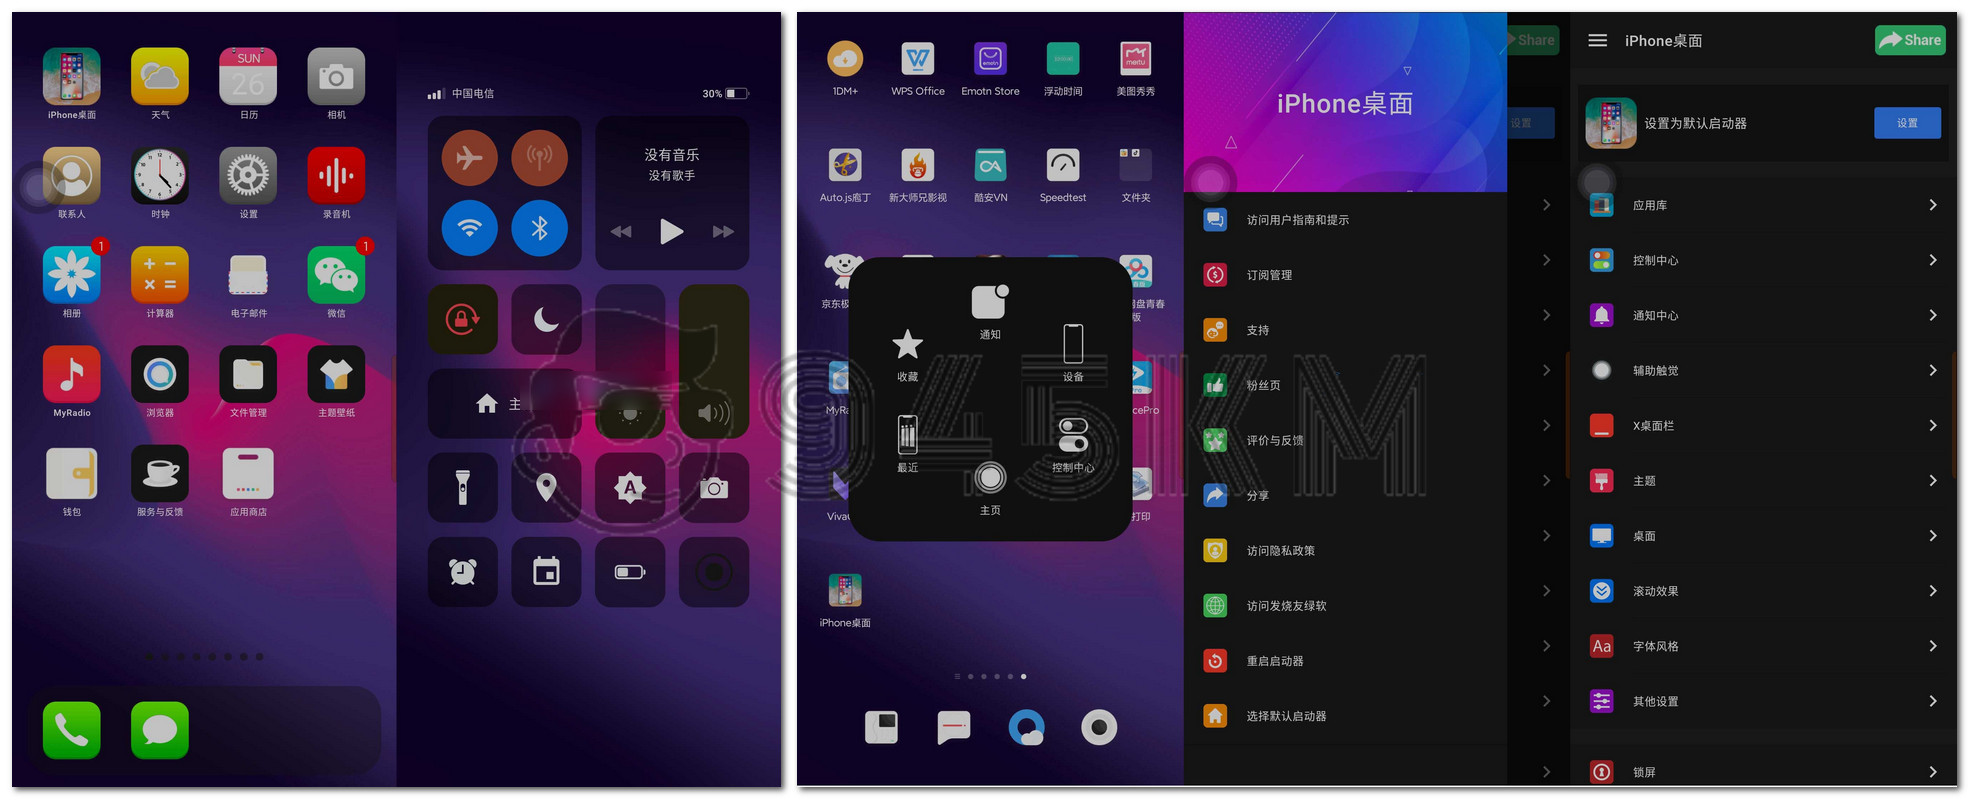 【Android】iPhone Launcher v8.2.0 | iPhone桌面、汉化、解锁高级版插图